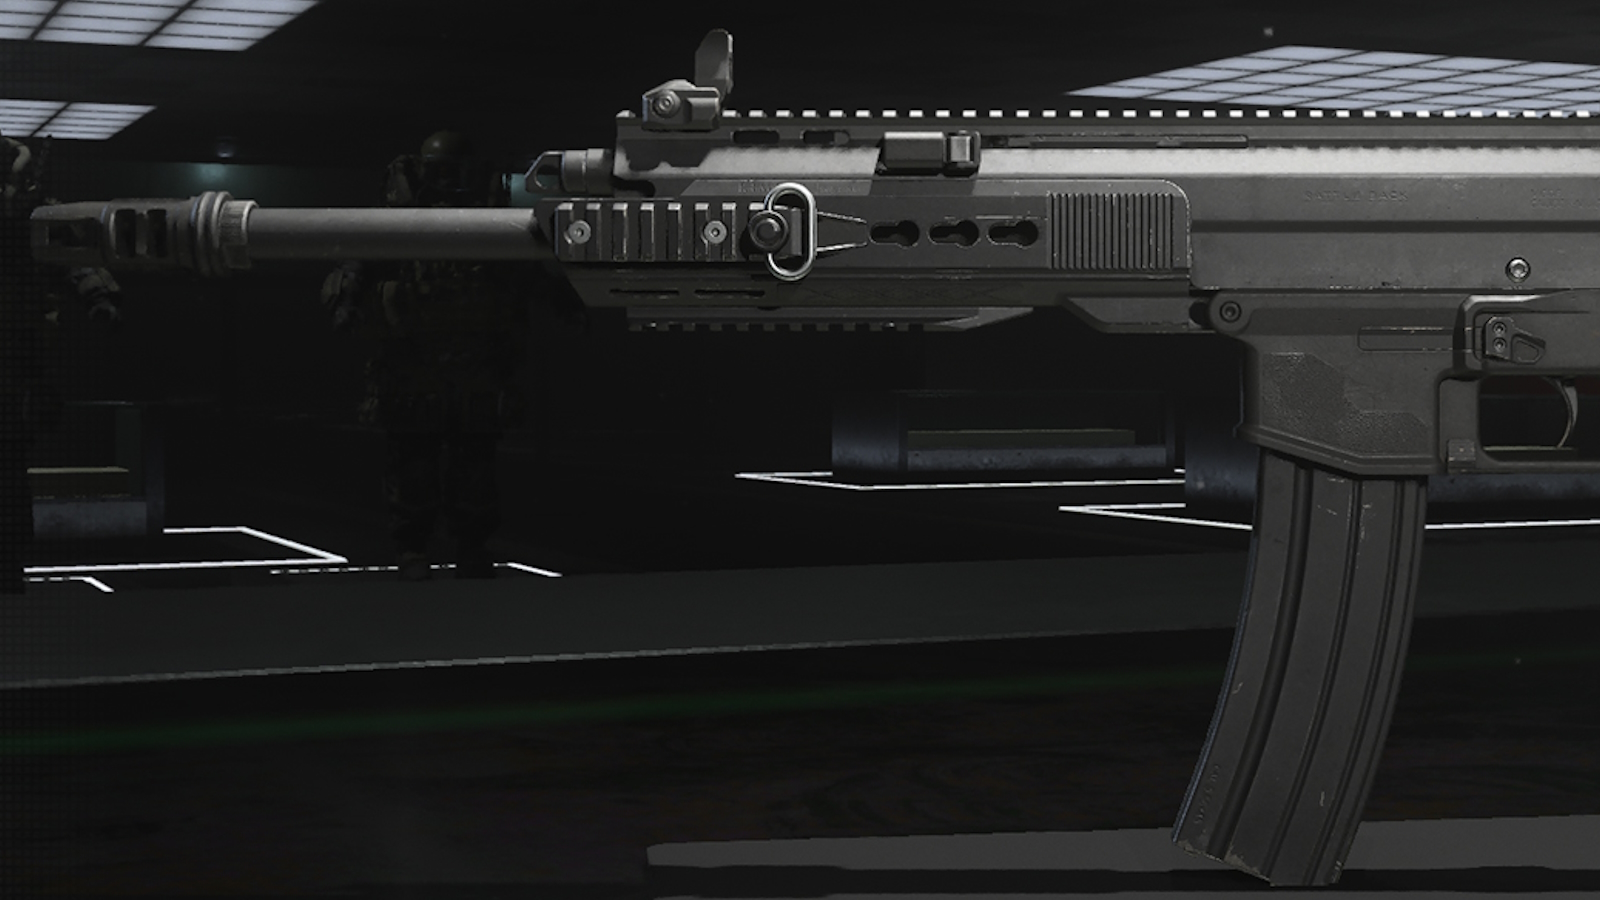 Long-awaited Season 2 Update Turns MW3’s Least Effective Weapon into an Absolute Beast